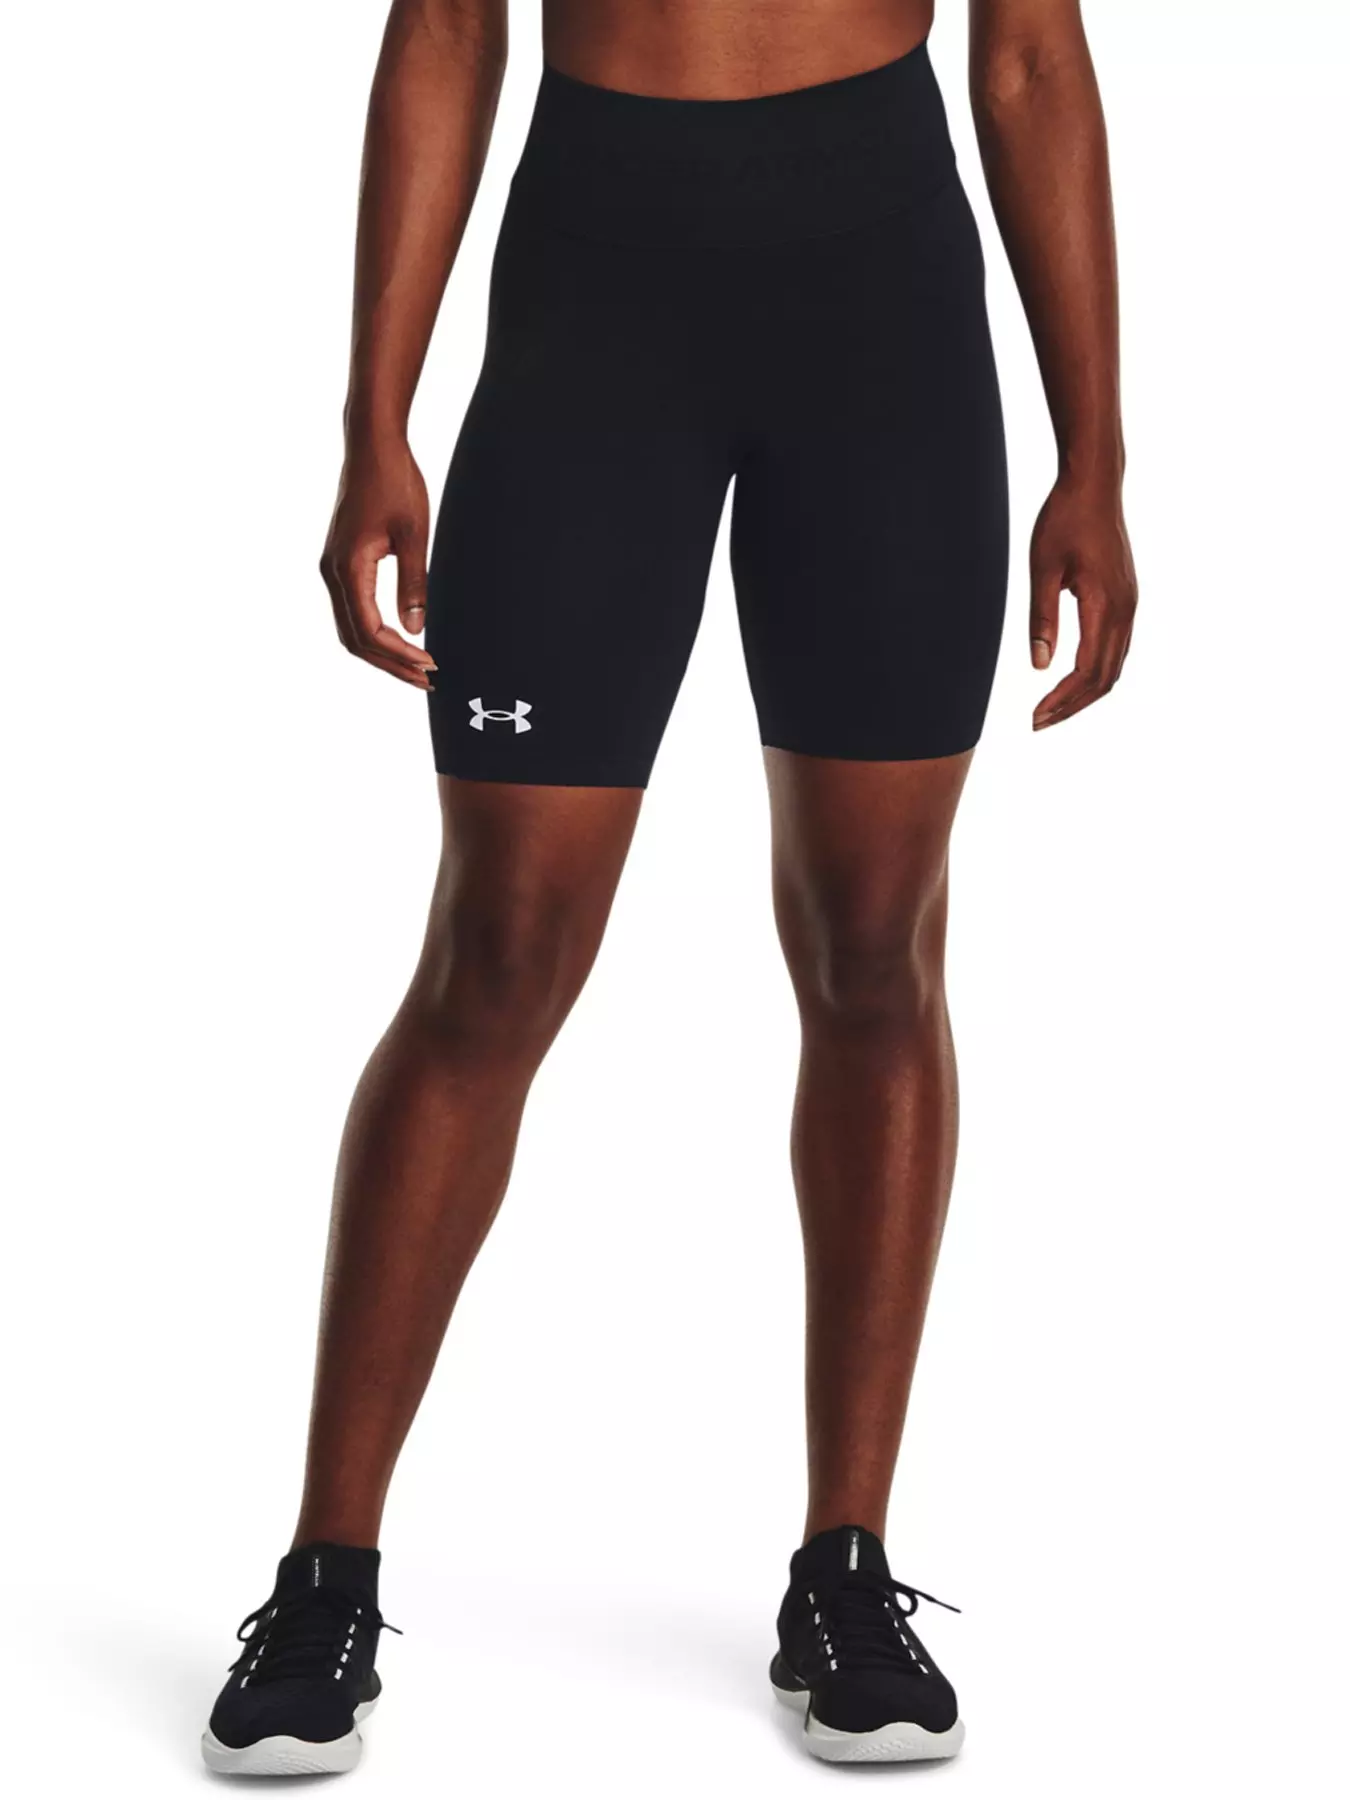 TLC Sport Performance Extra Strong Compression Micron Shorts With